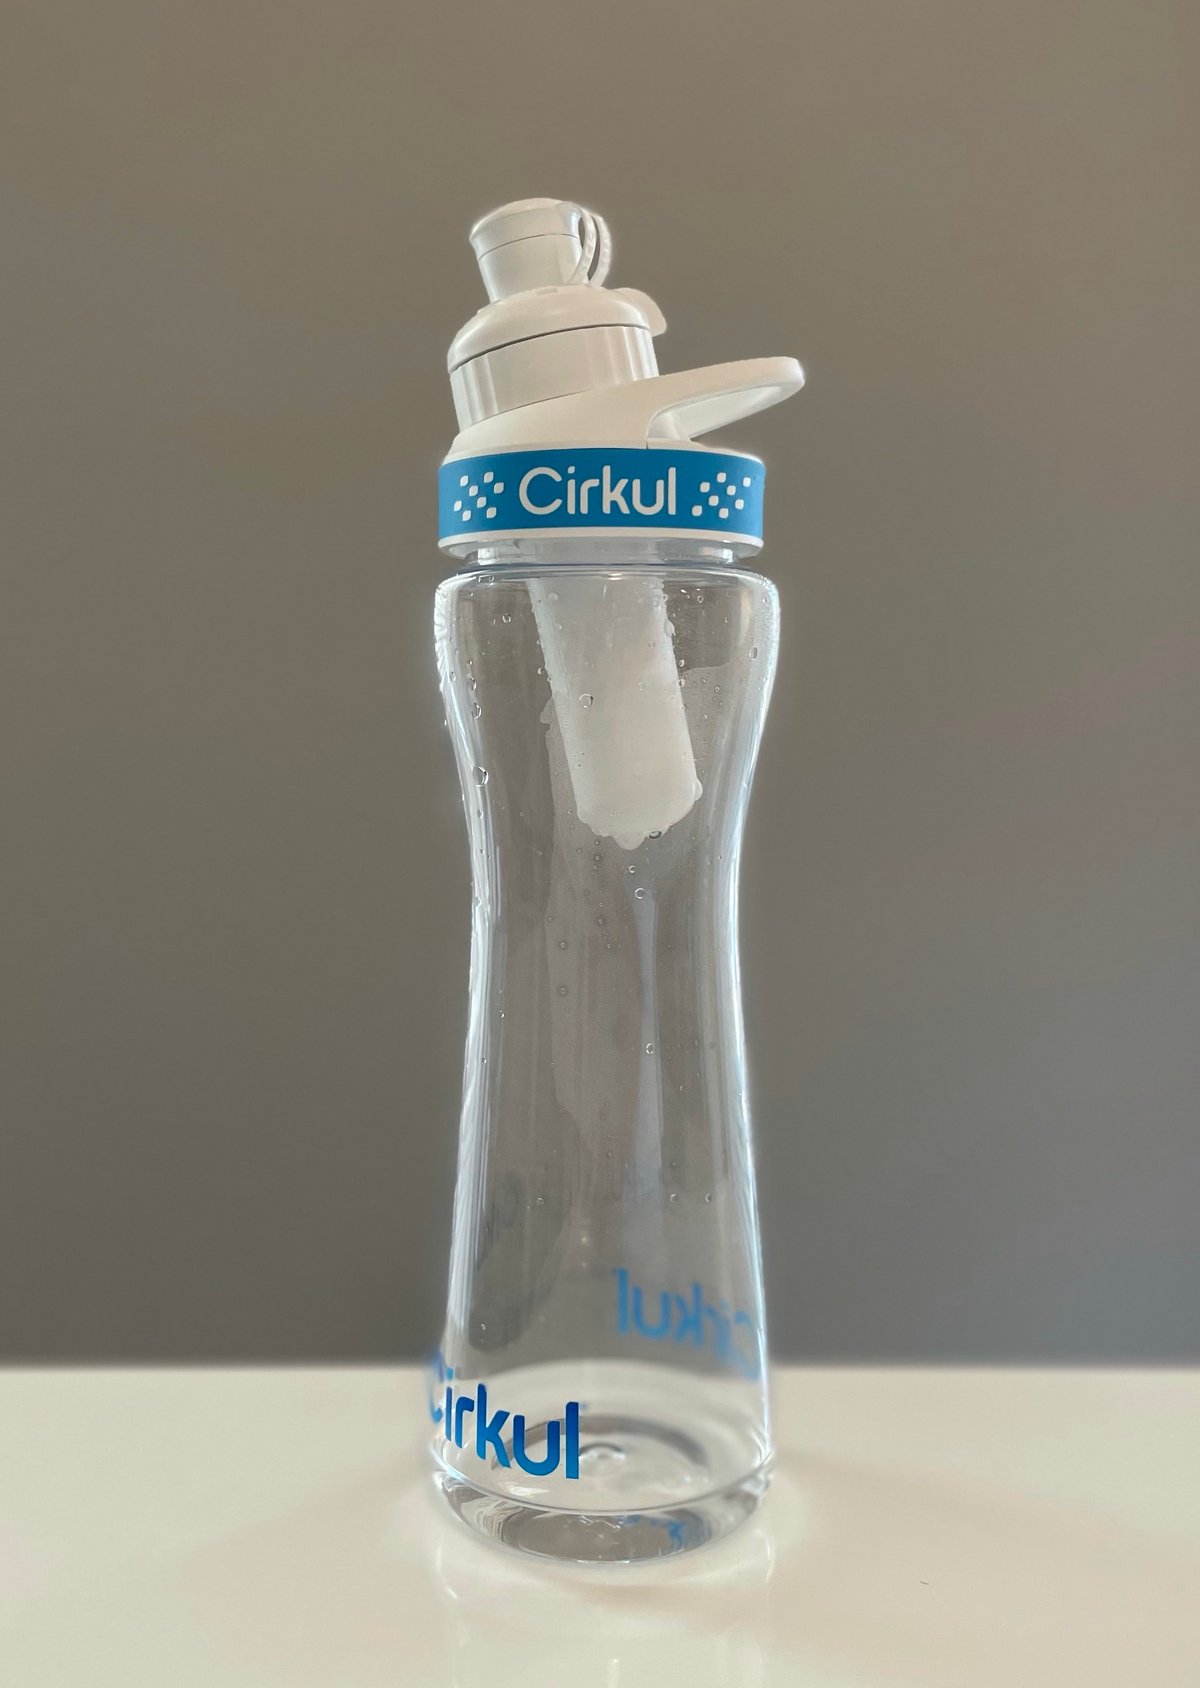 Cirkul - Level up your hydration style, and make room for